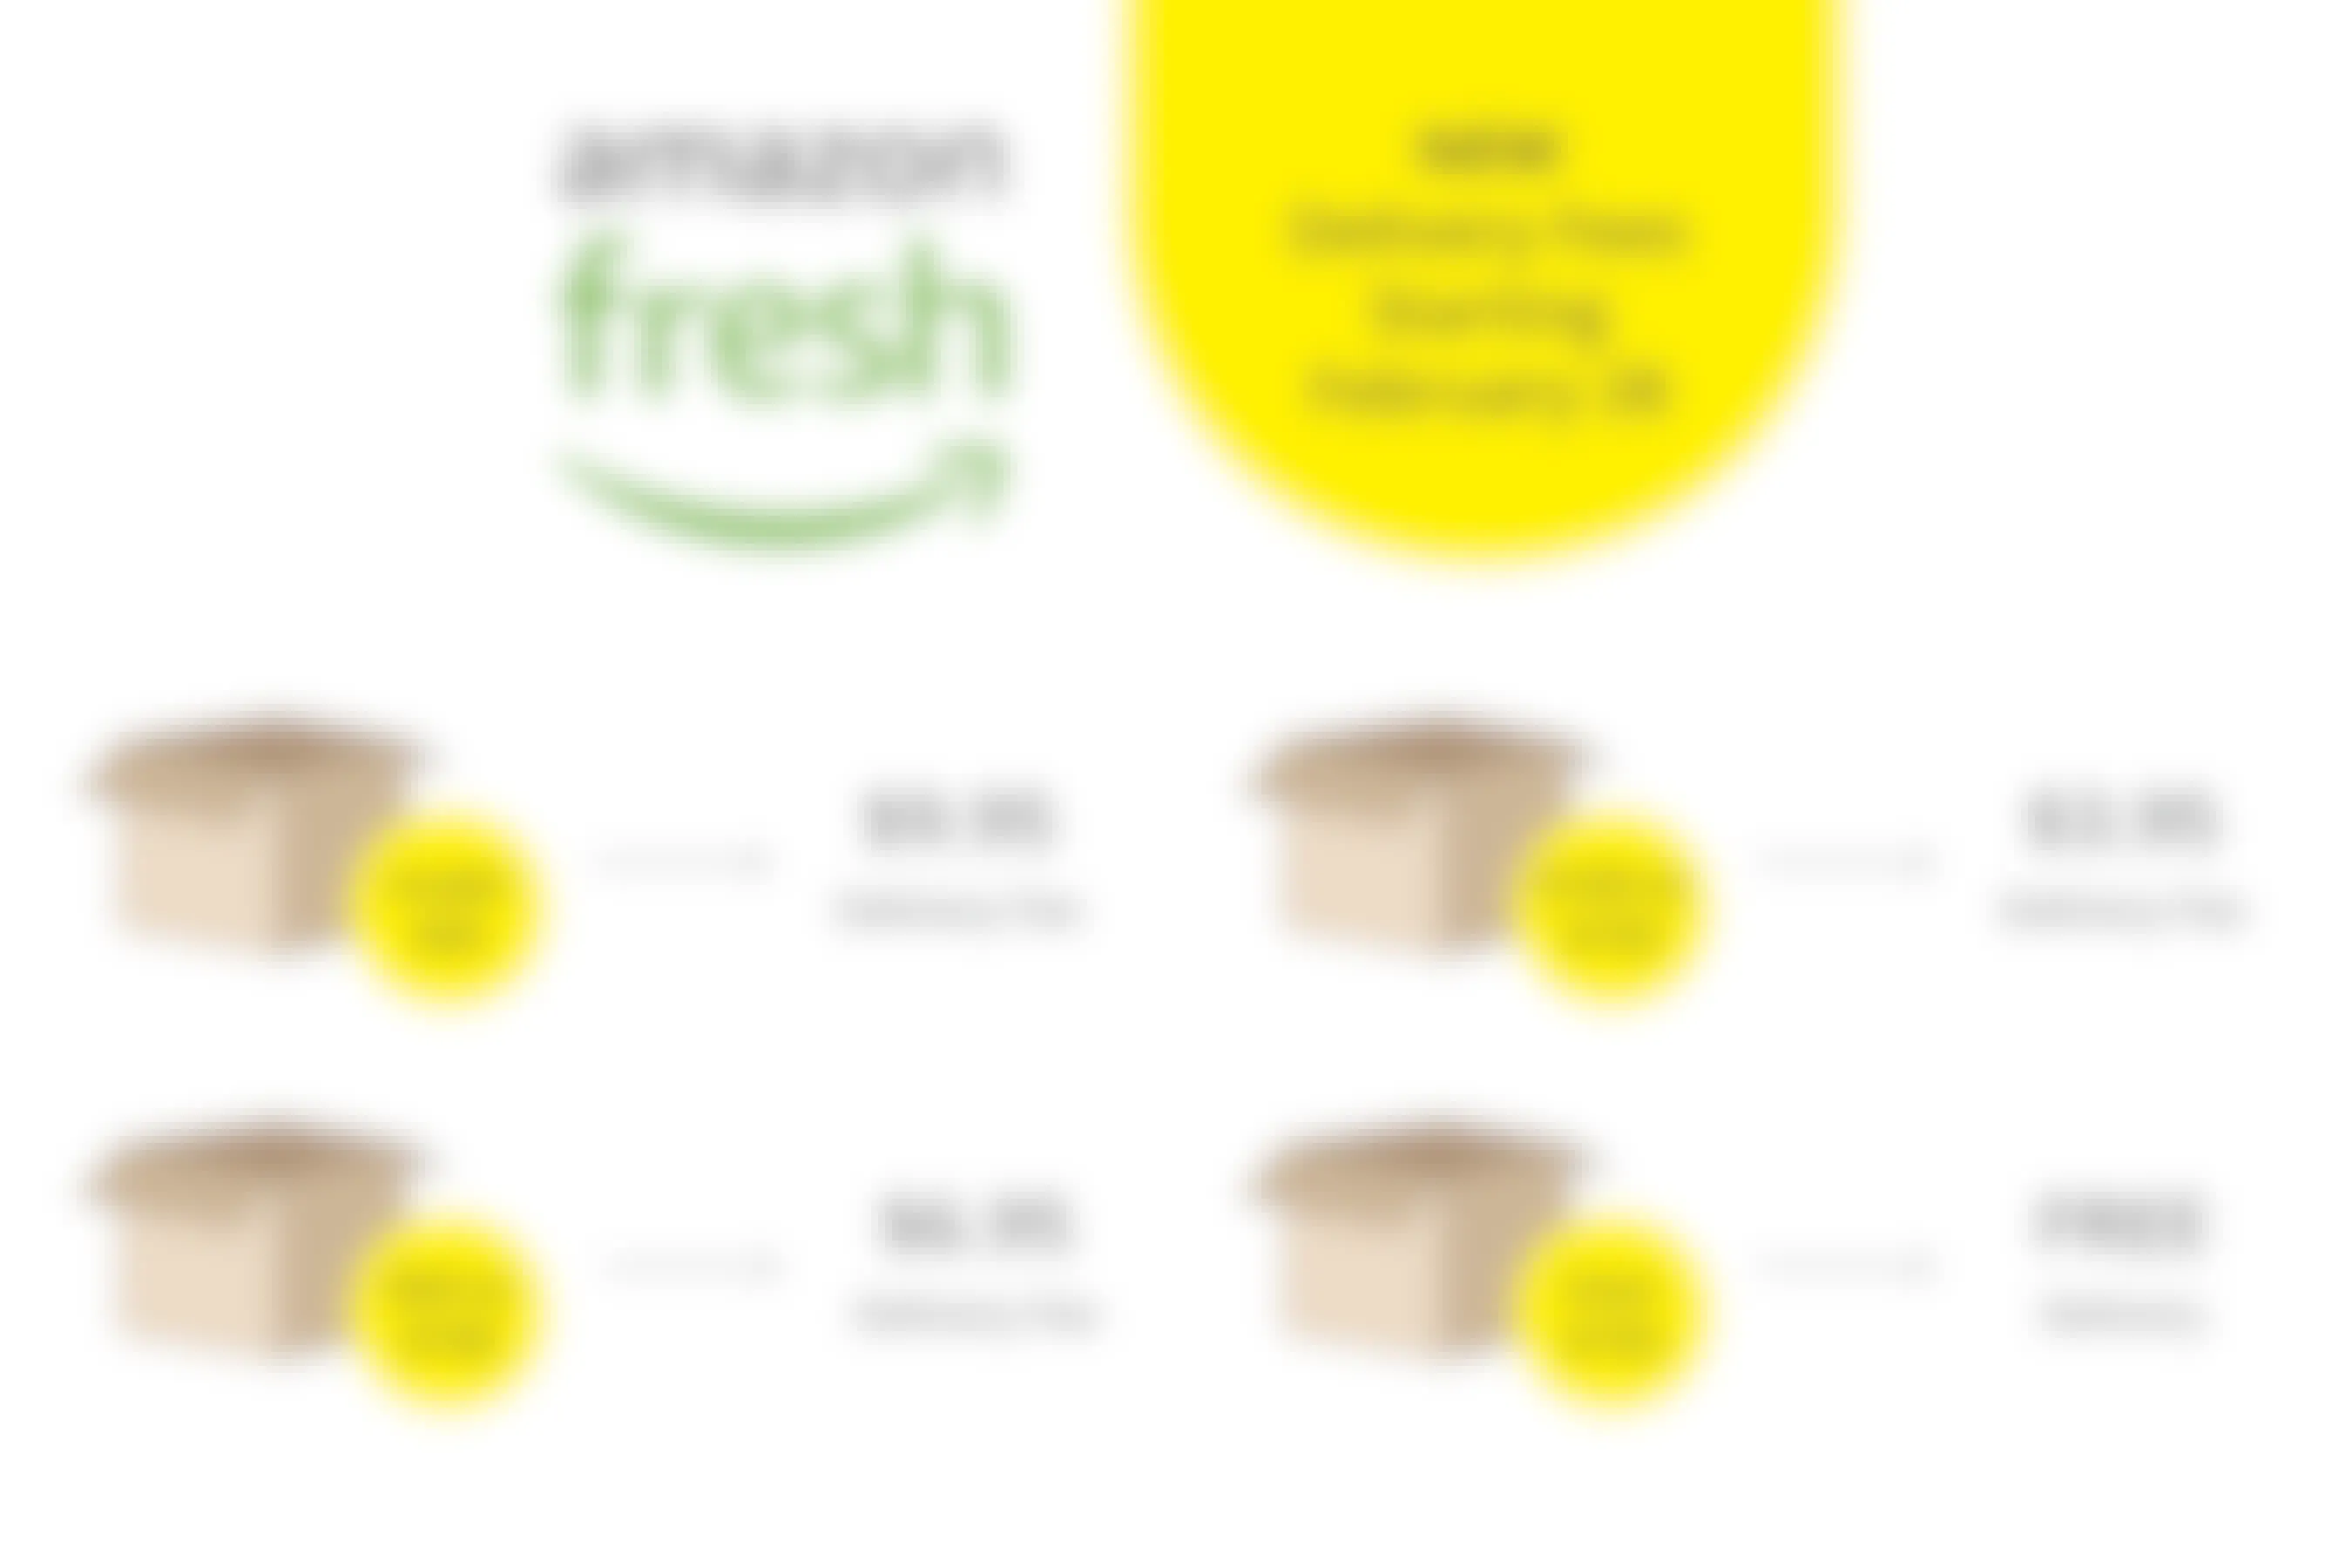 A graphic showing amazon fresh delivery fees starting February 28, 2023: Under $50: $9.95 delivery fee. $50 - $100: $6.95. Delivery fee. $100 - $150: $3.95. Delivery fee Over $150: Free.